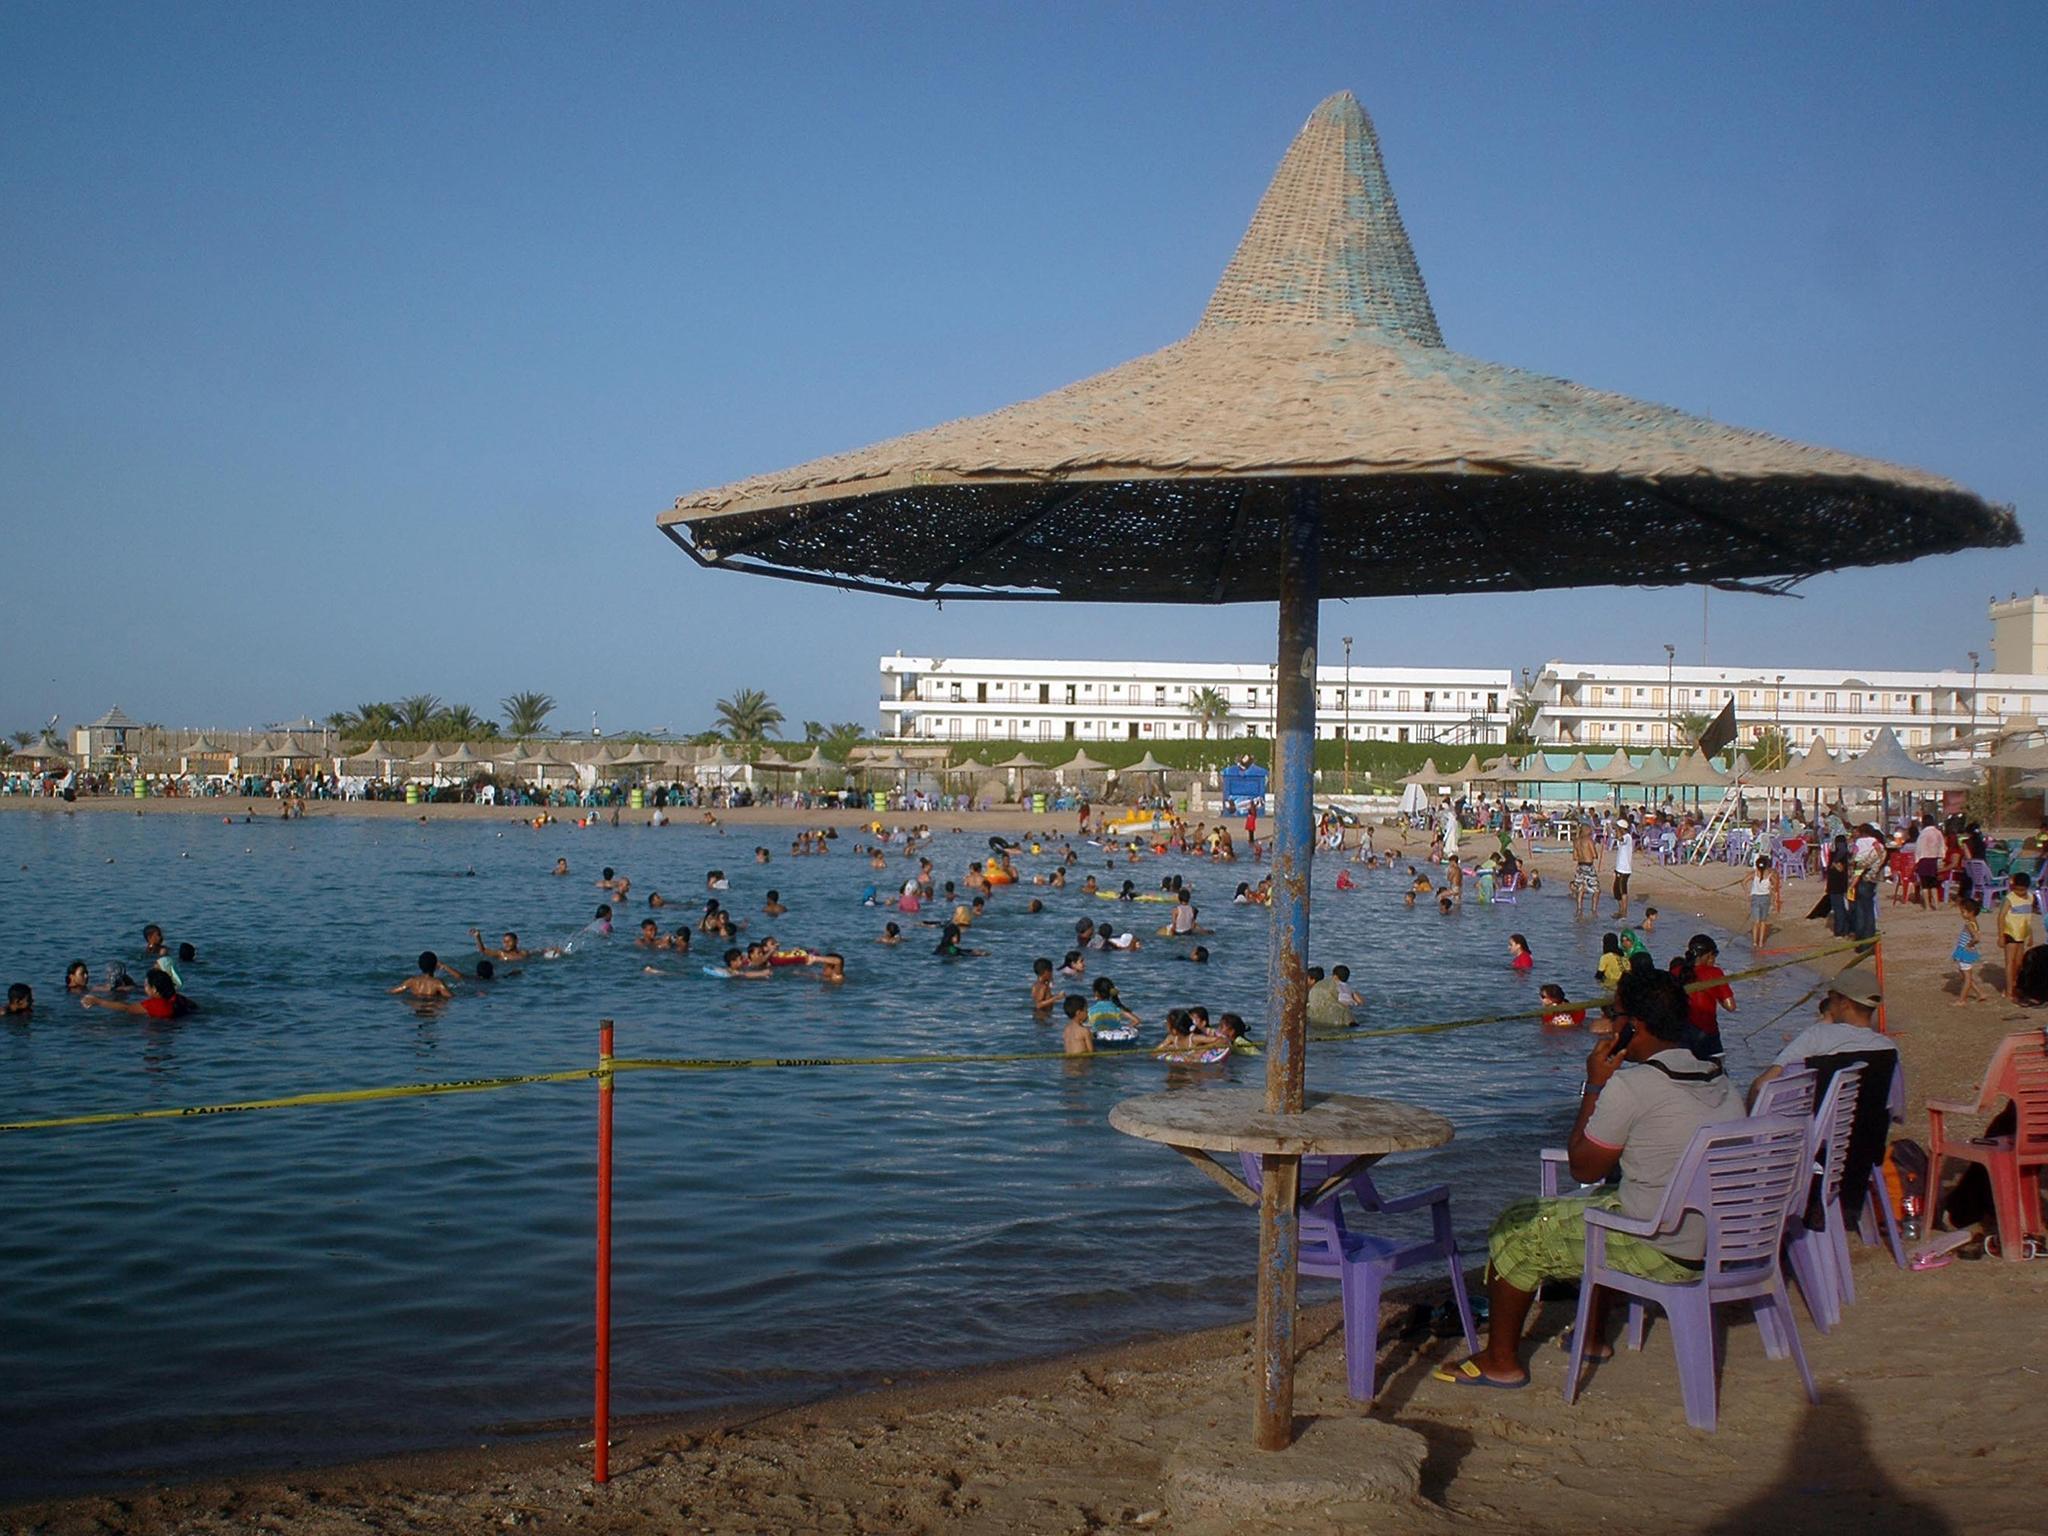 Egyptians enjoy the public beach along the Red Sea resort of Hurghada, in southern Egypt (file photo)